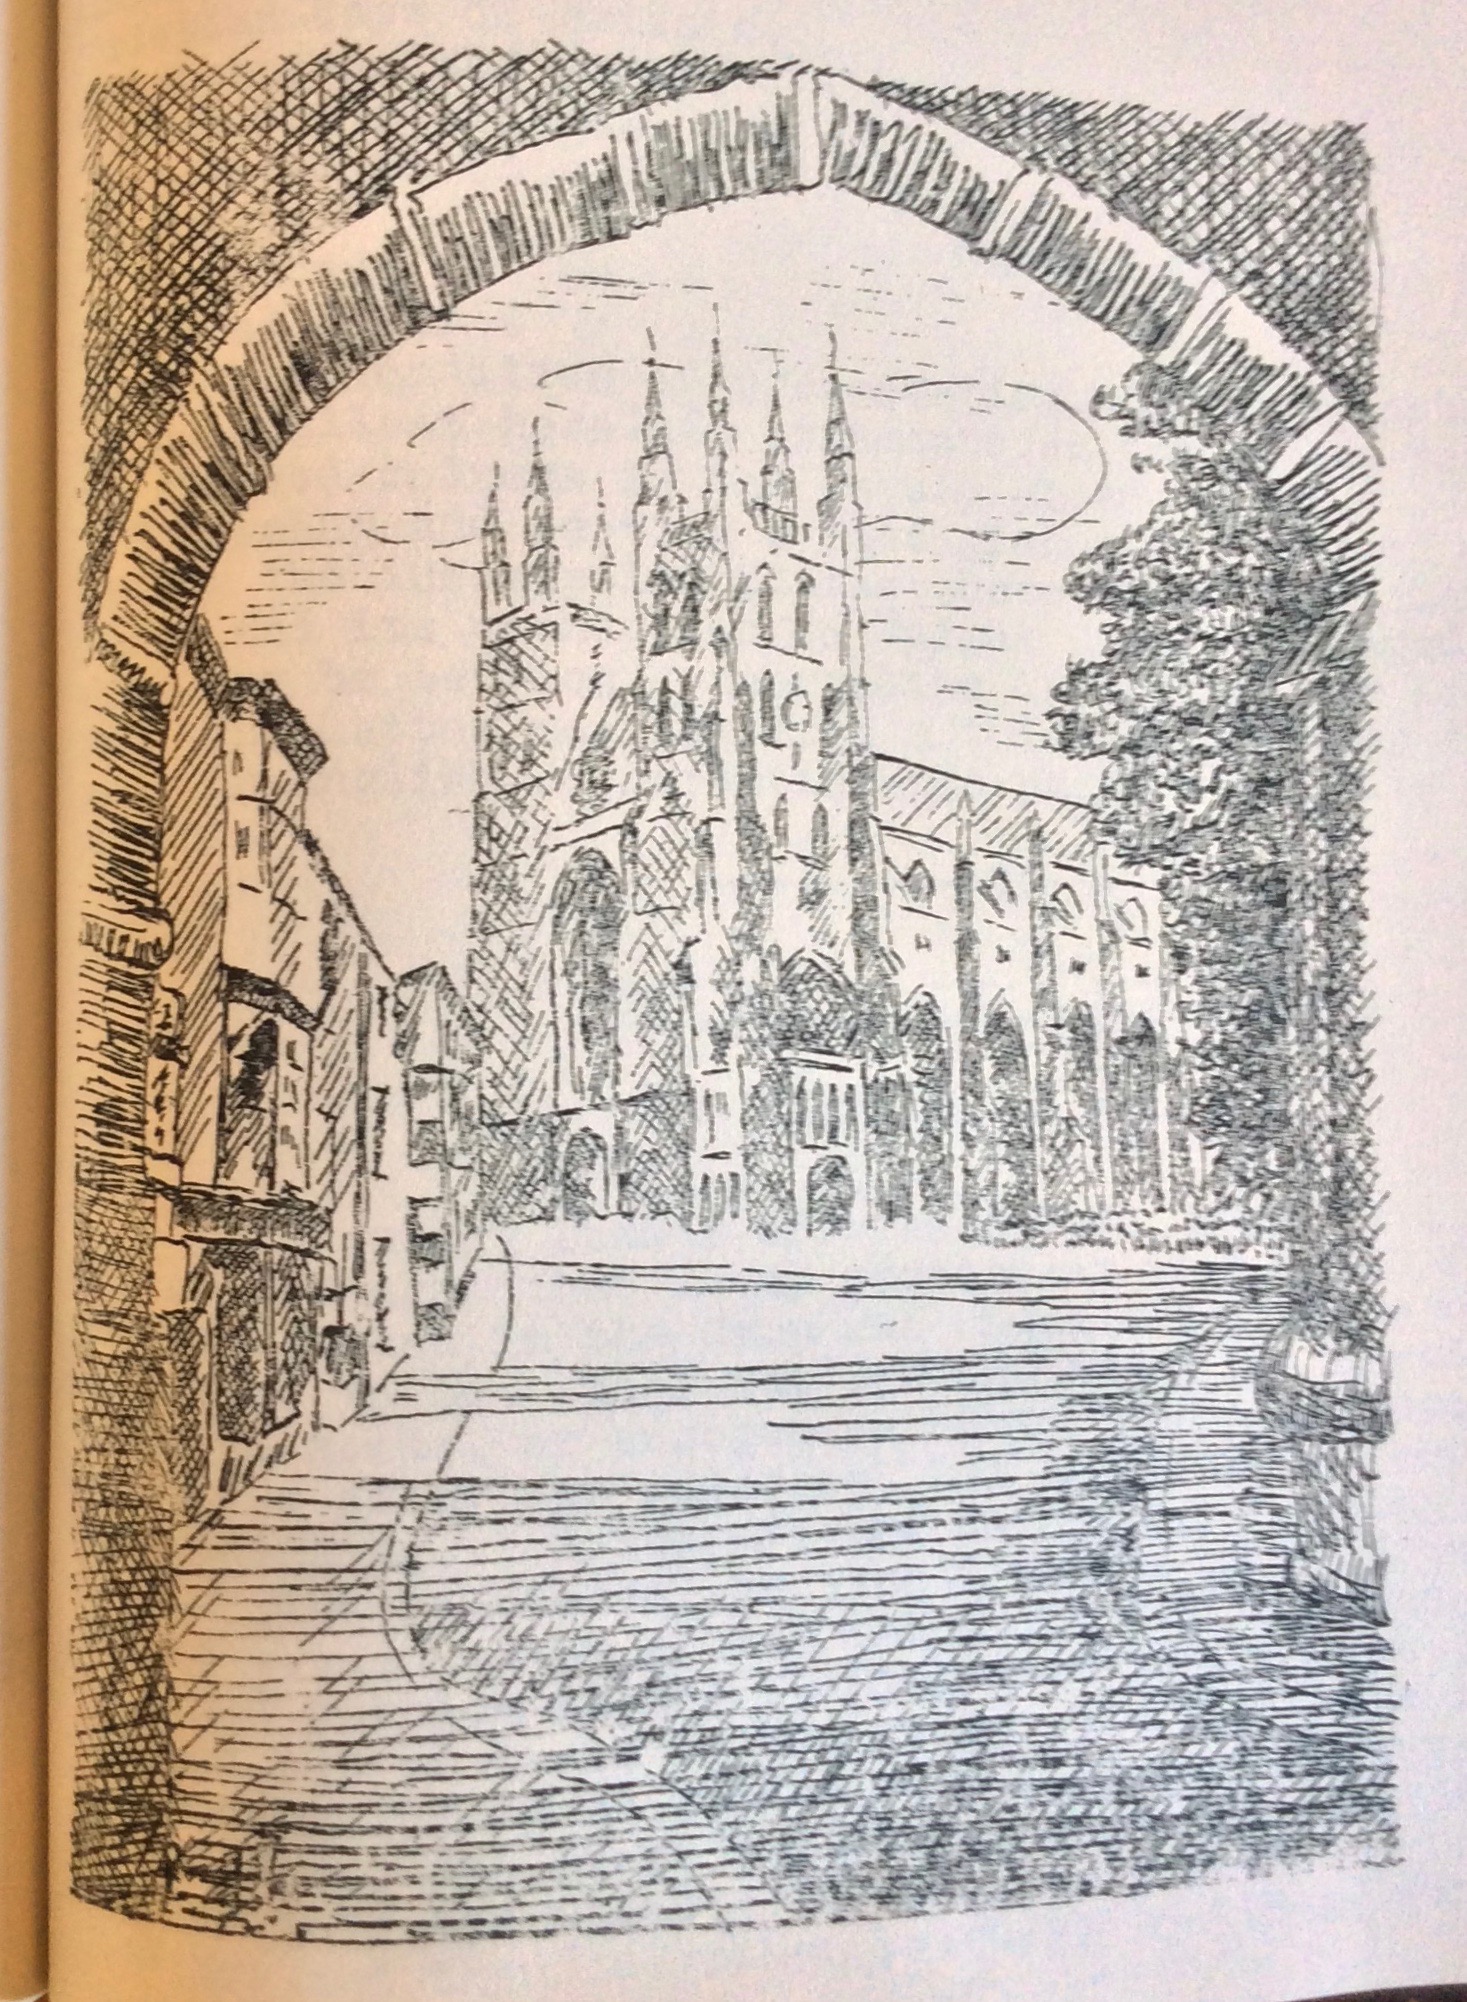 The Kitchener Camp Review, August 1939, Drawing, Canterbury cathedral, page 10